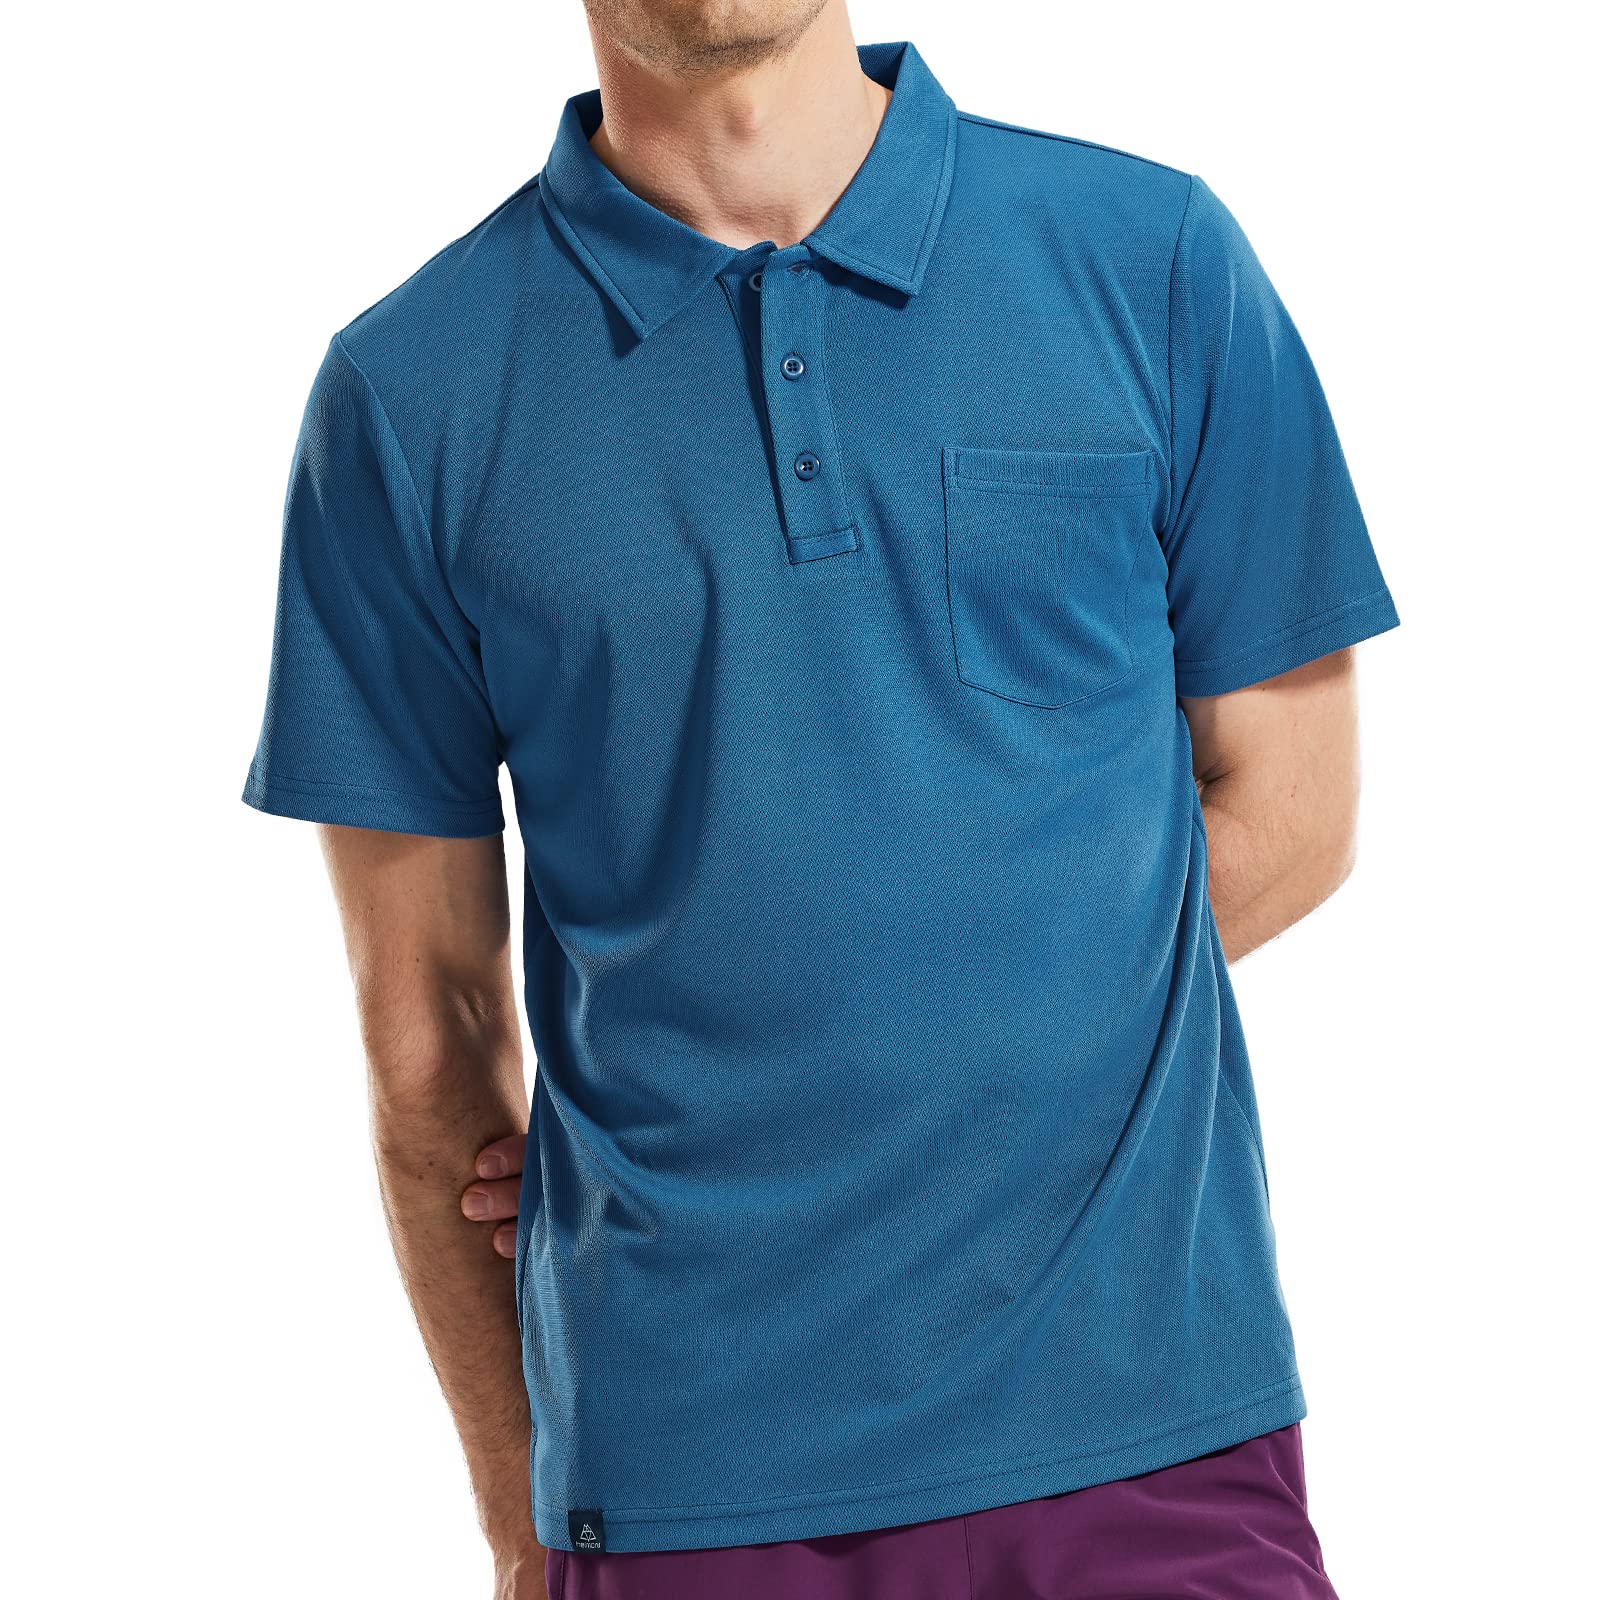 Haimont Men's Polo Shirts with Pocket Collared Golf T-Shirts